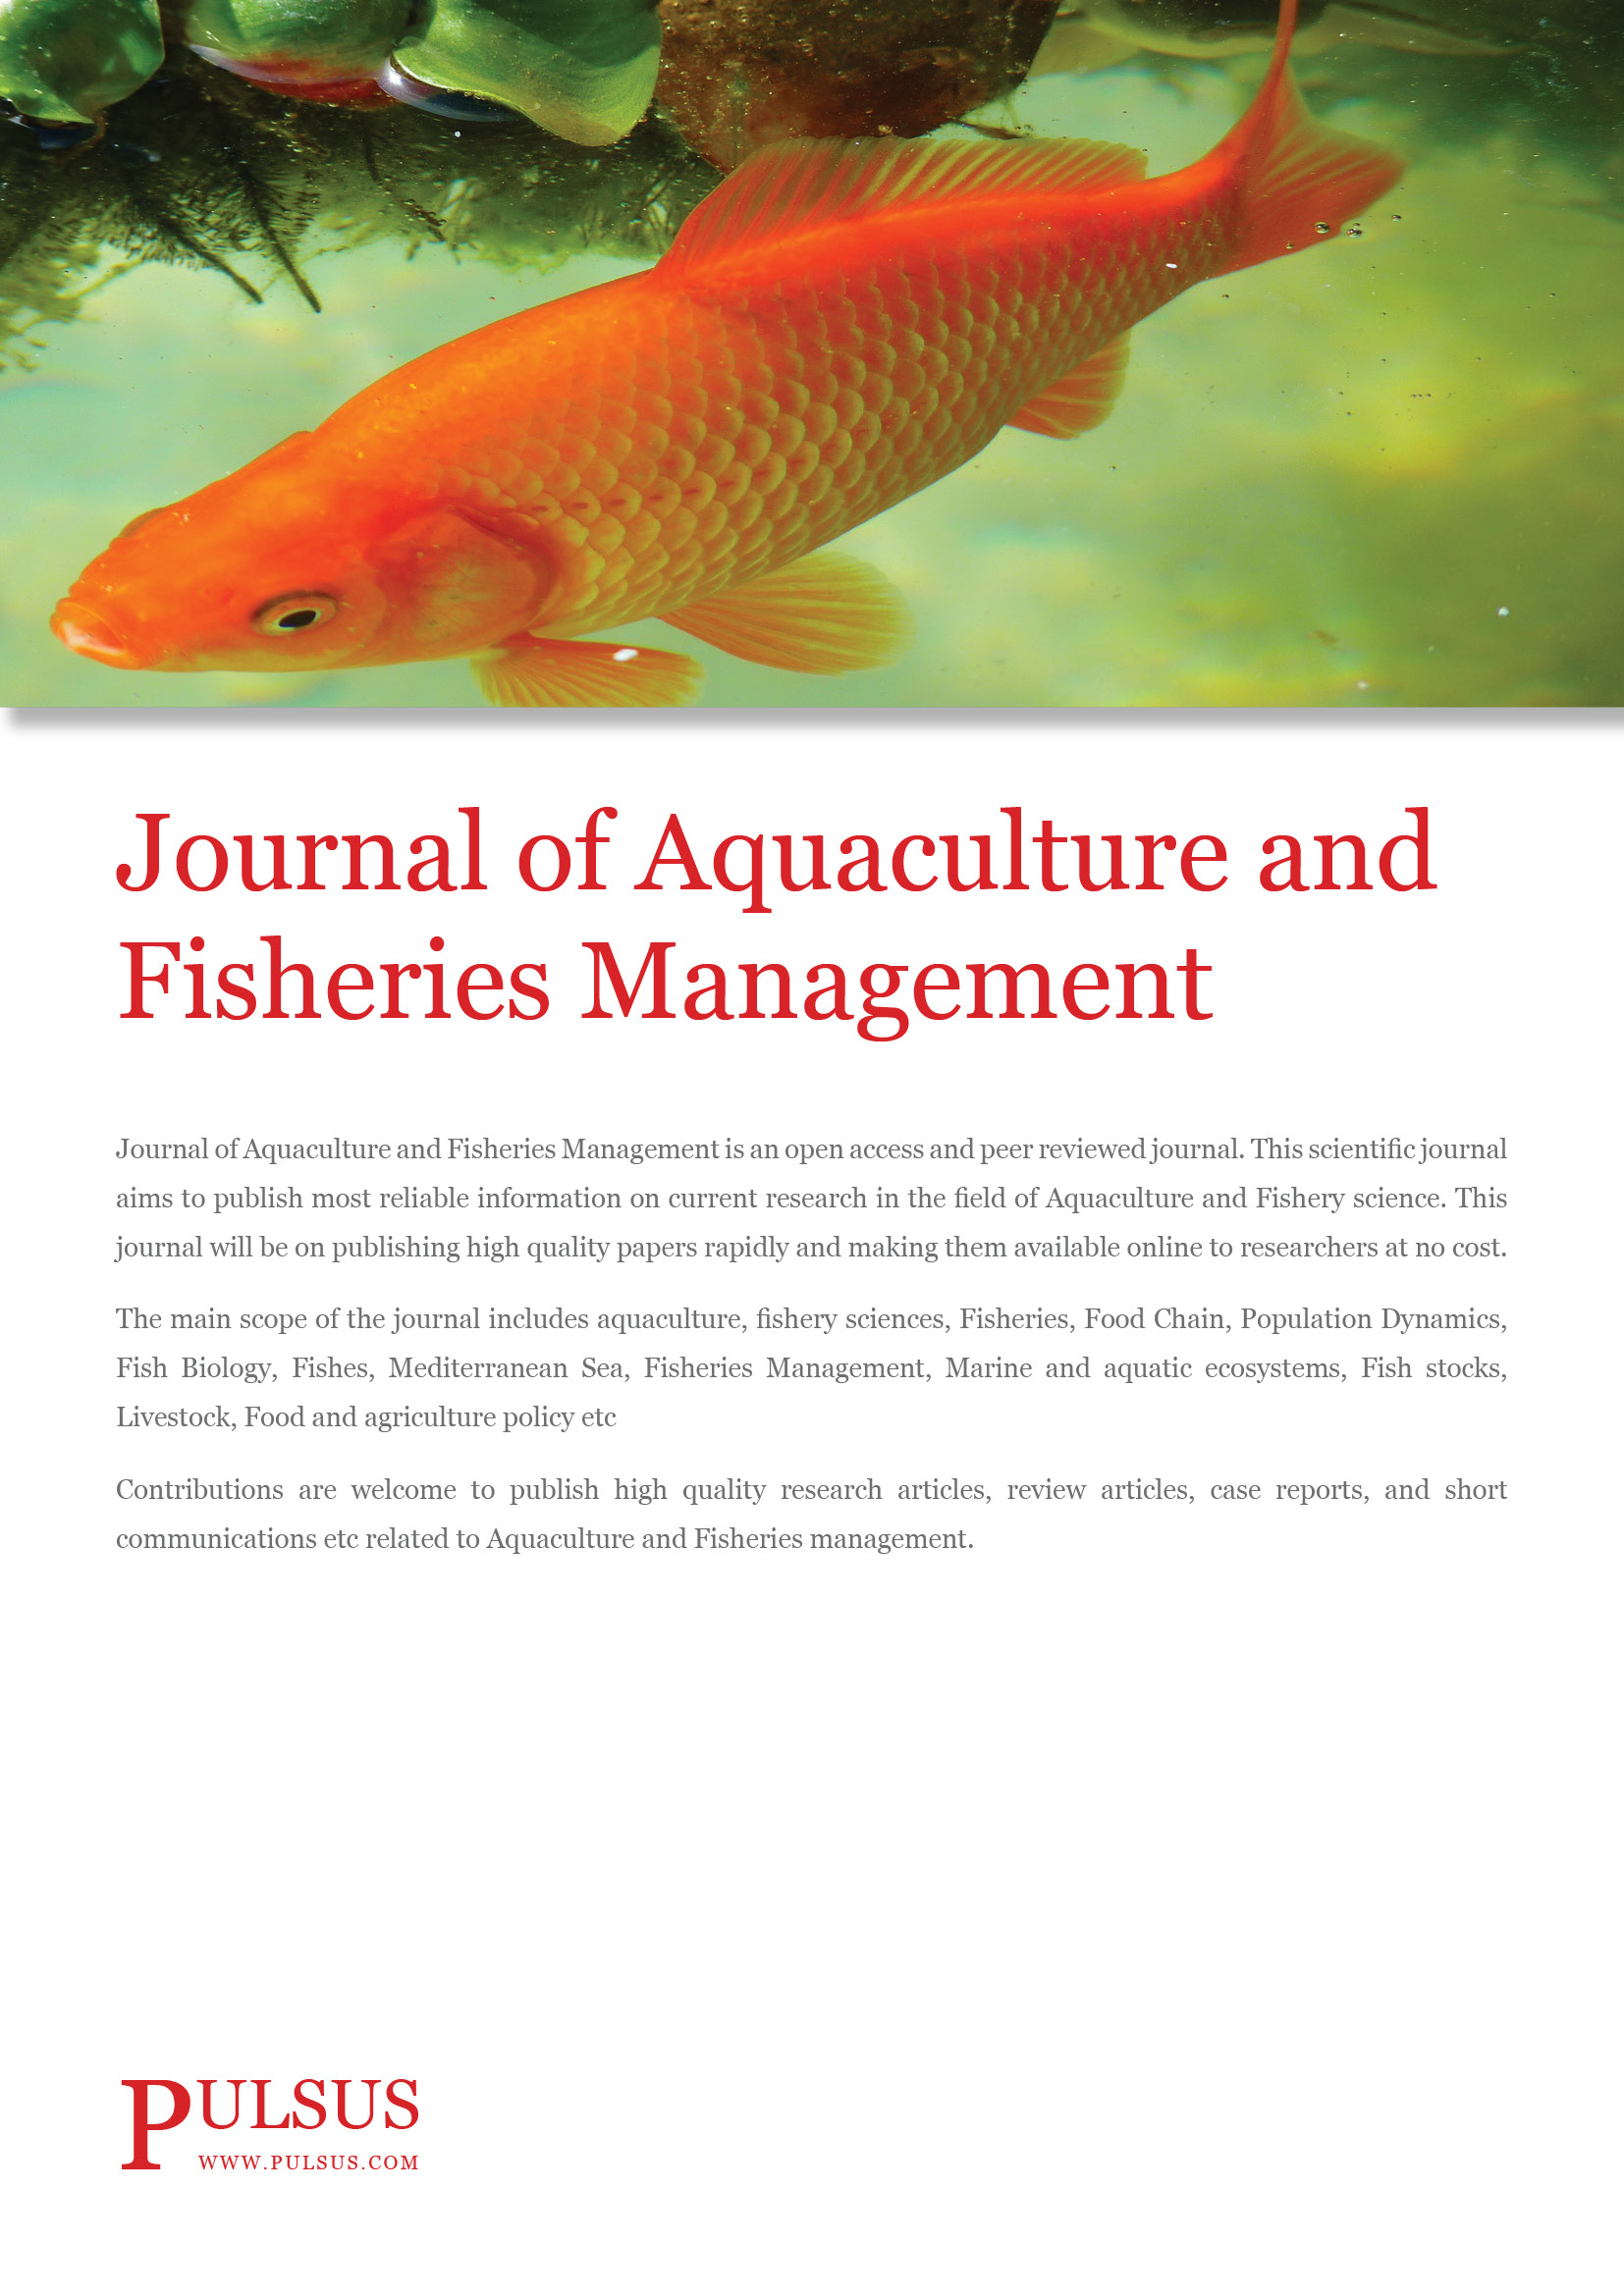 Journal of Aquaculture and Fisheries Management